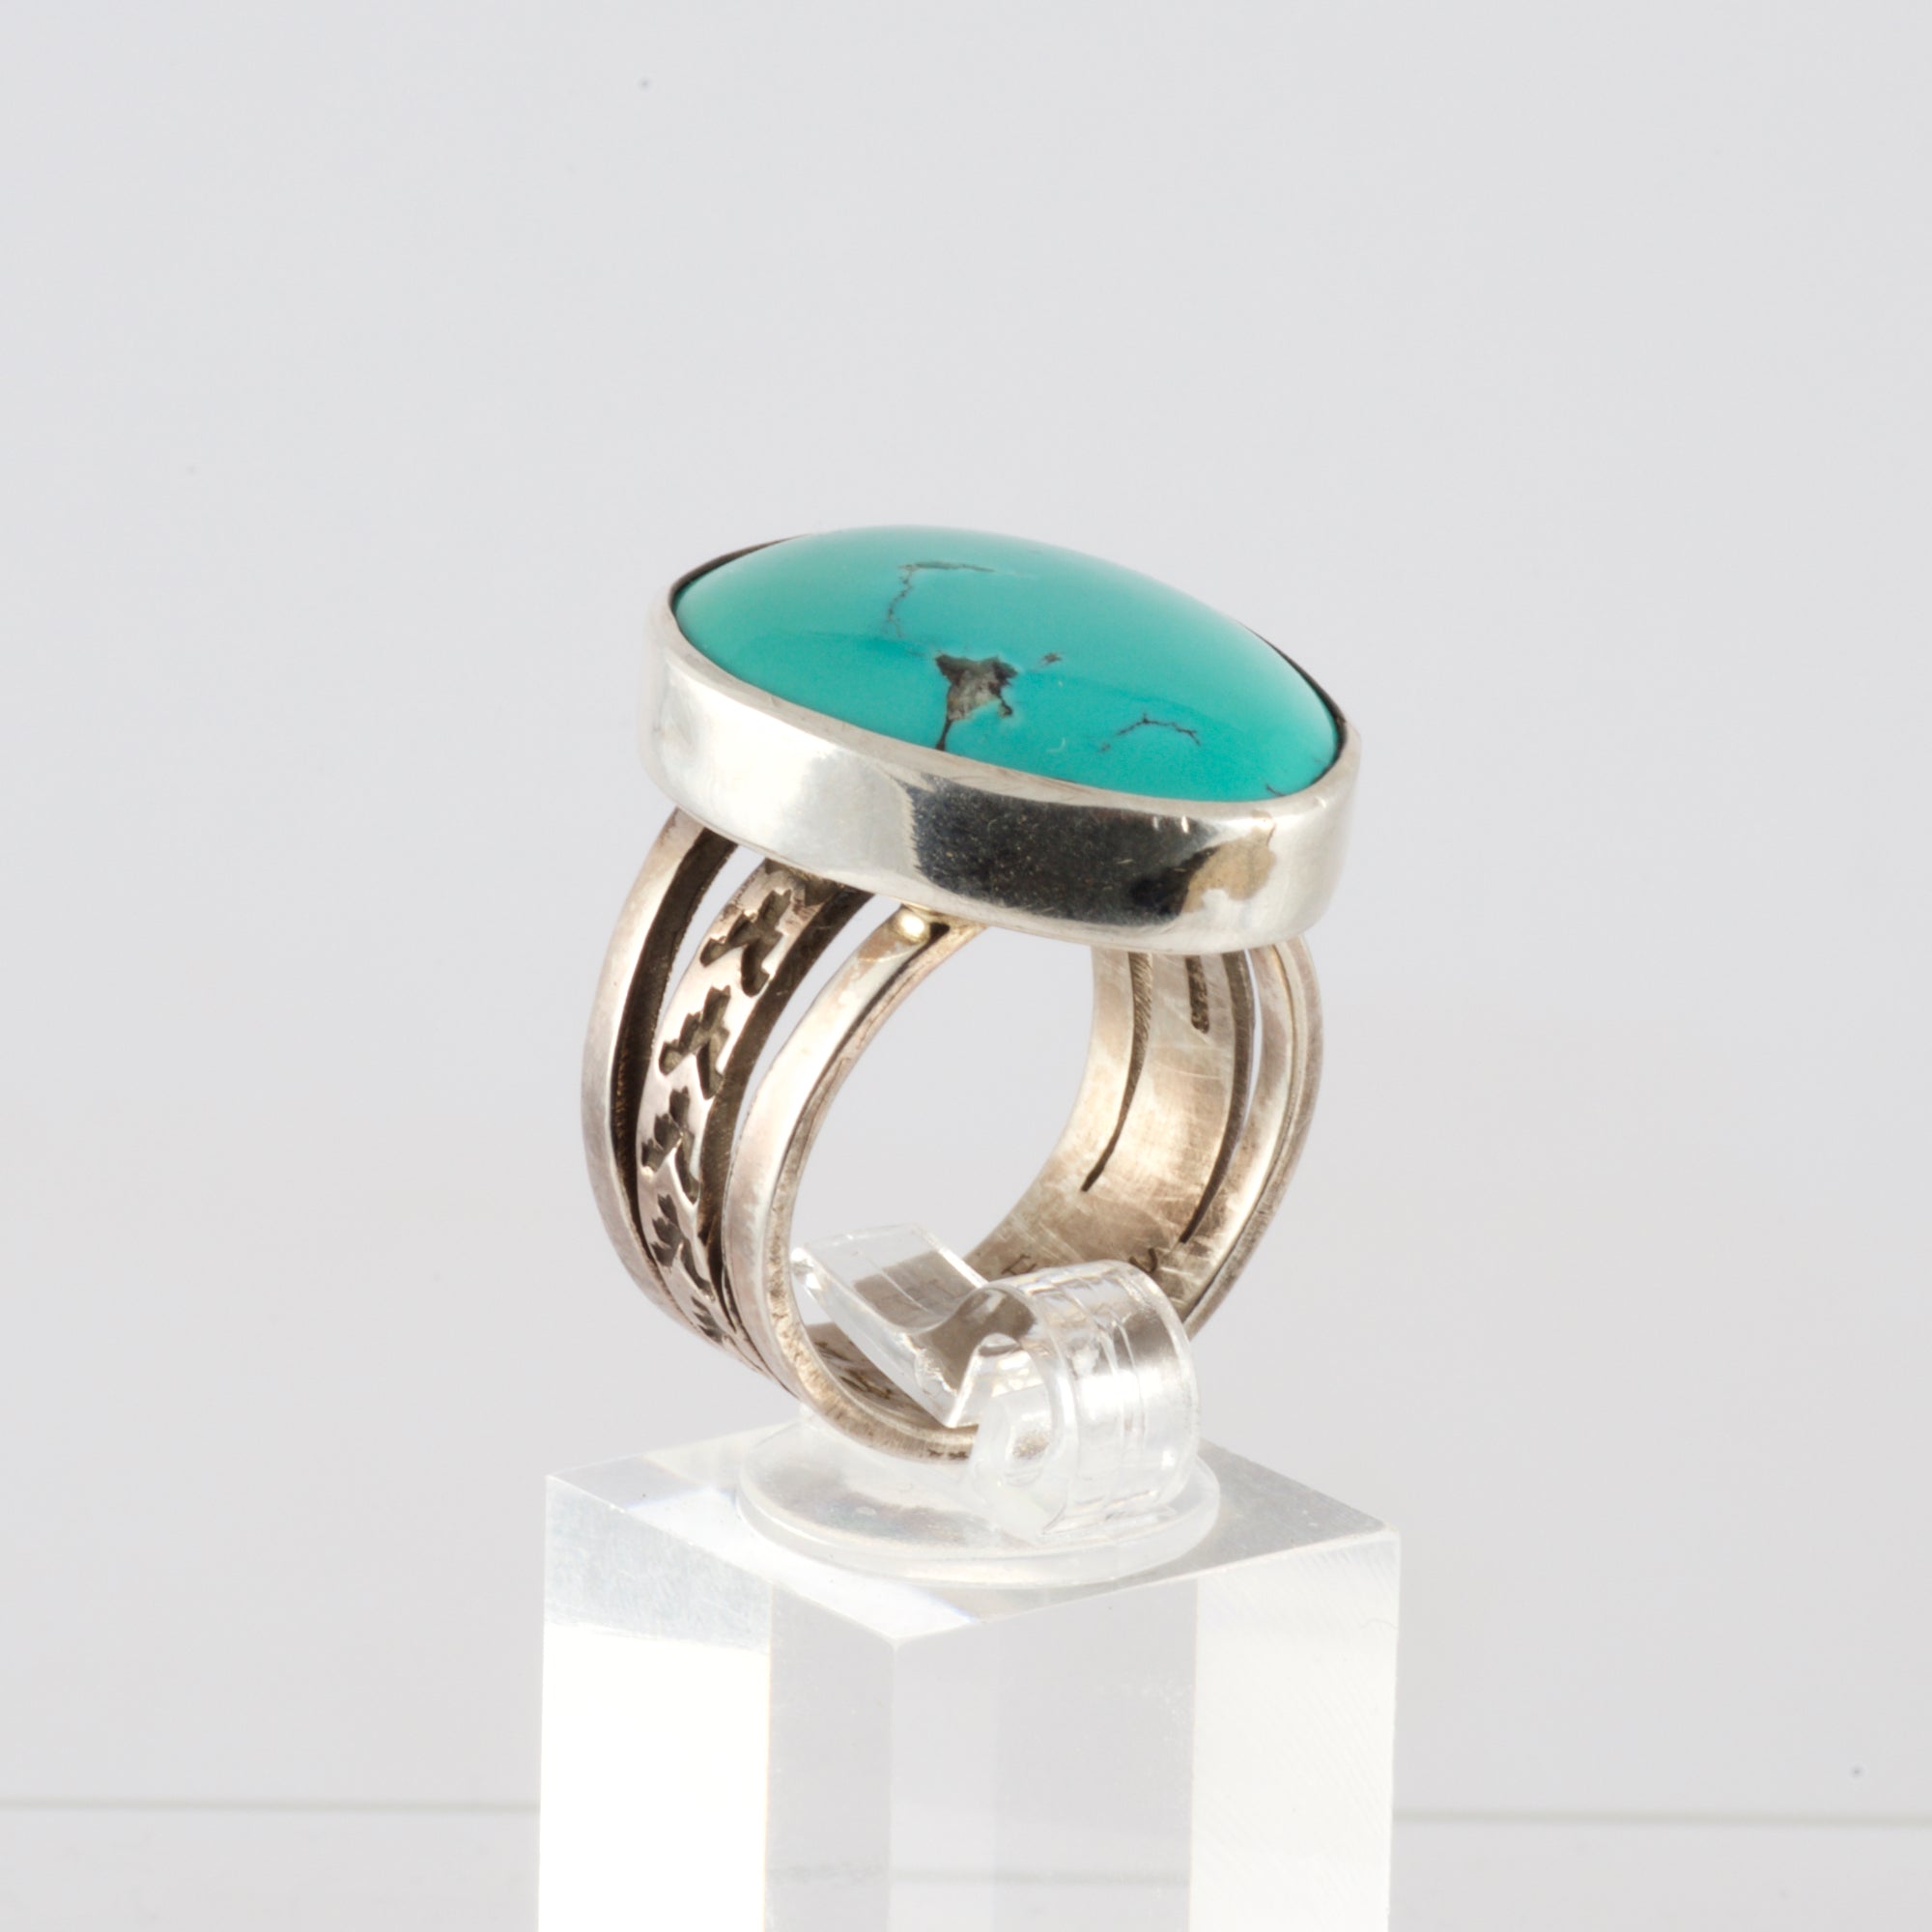 Ring With Turquoise stone